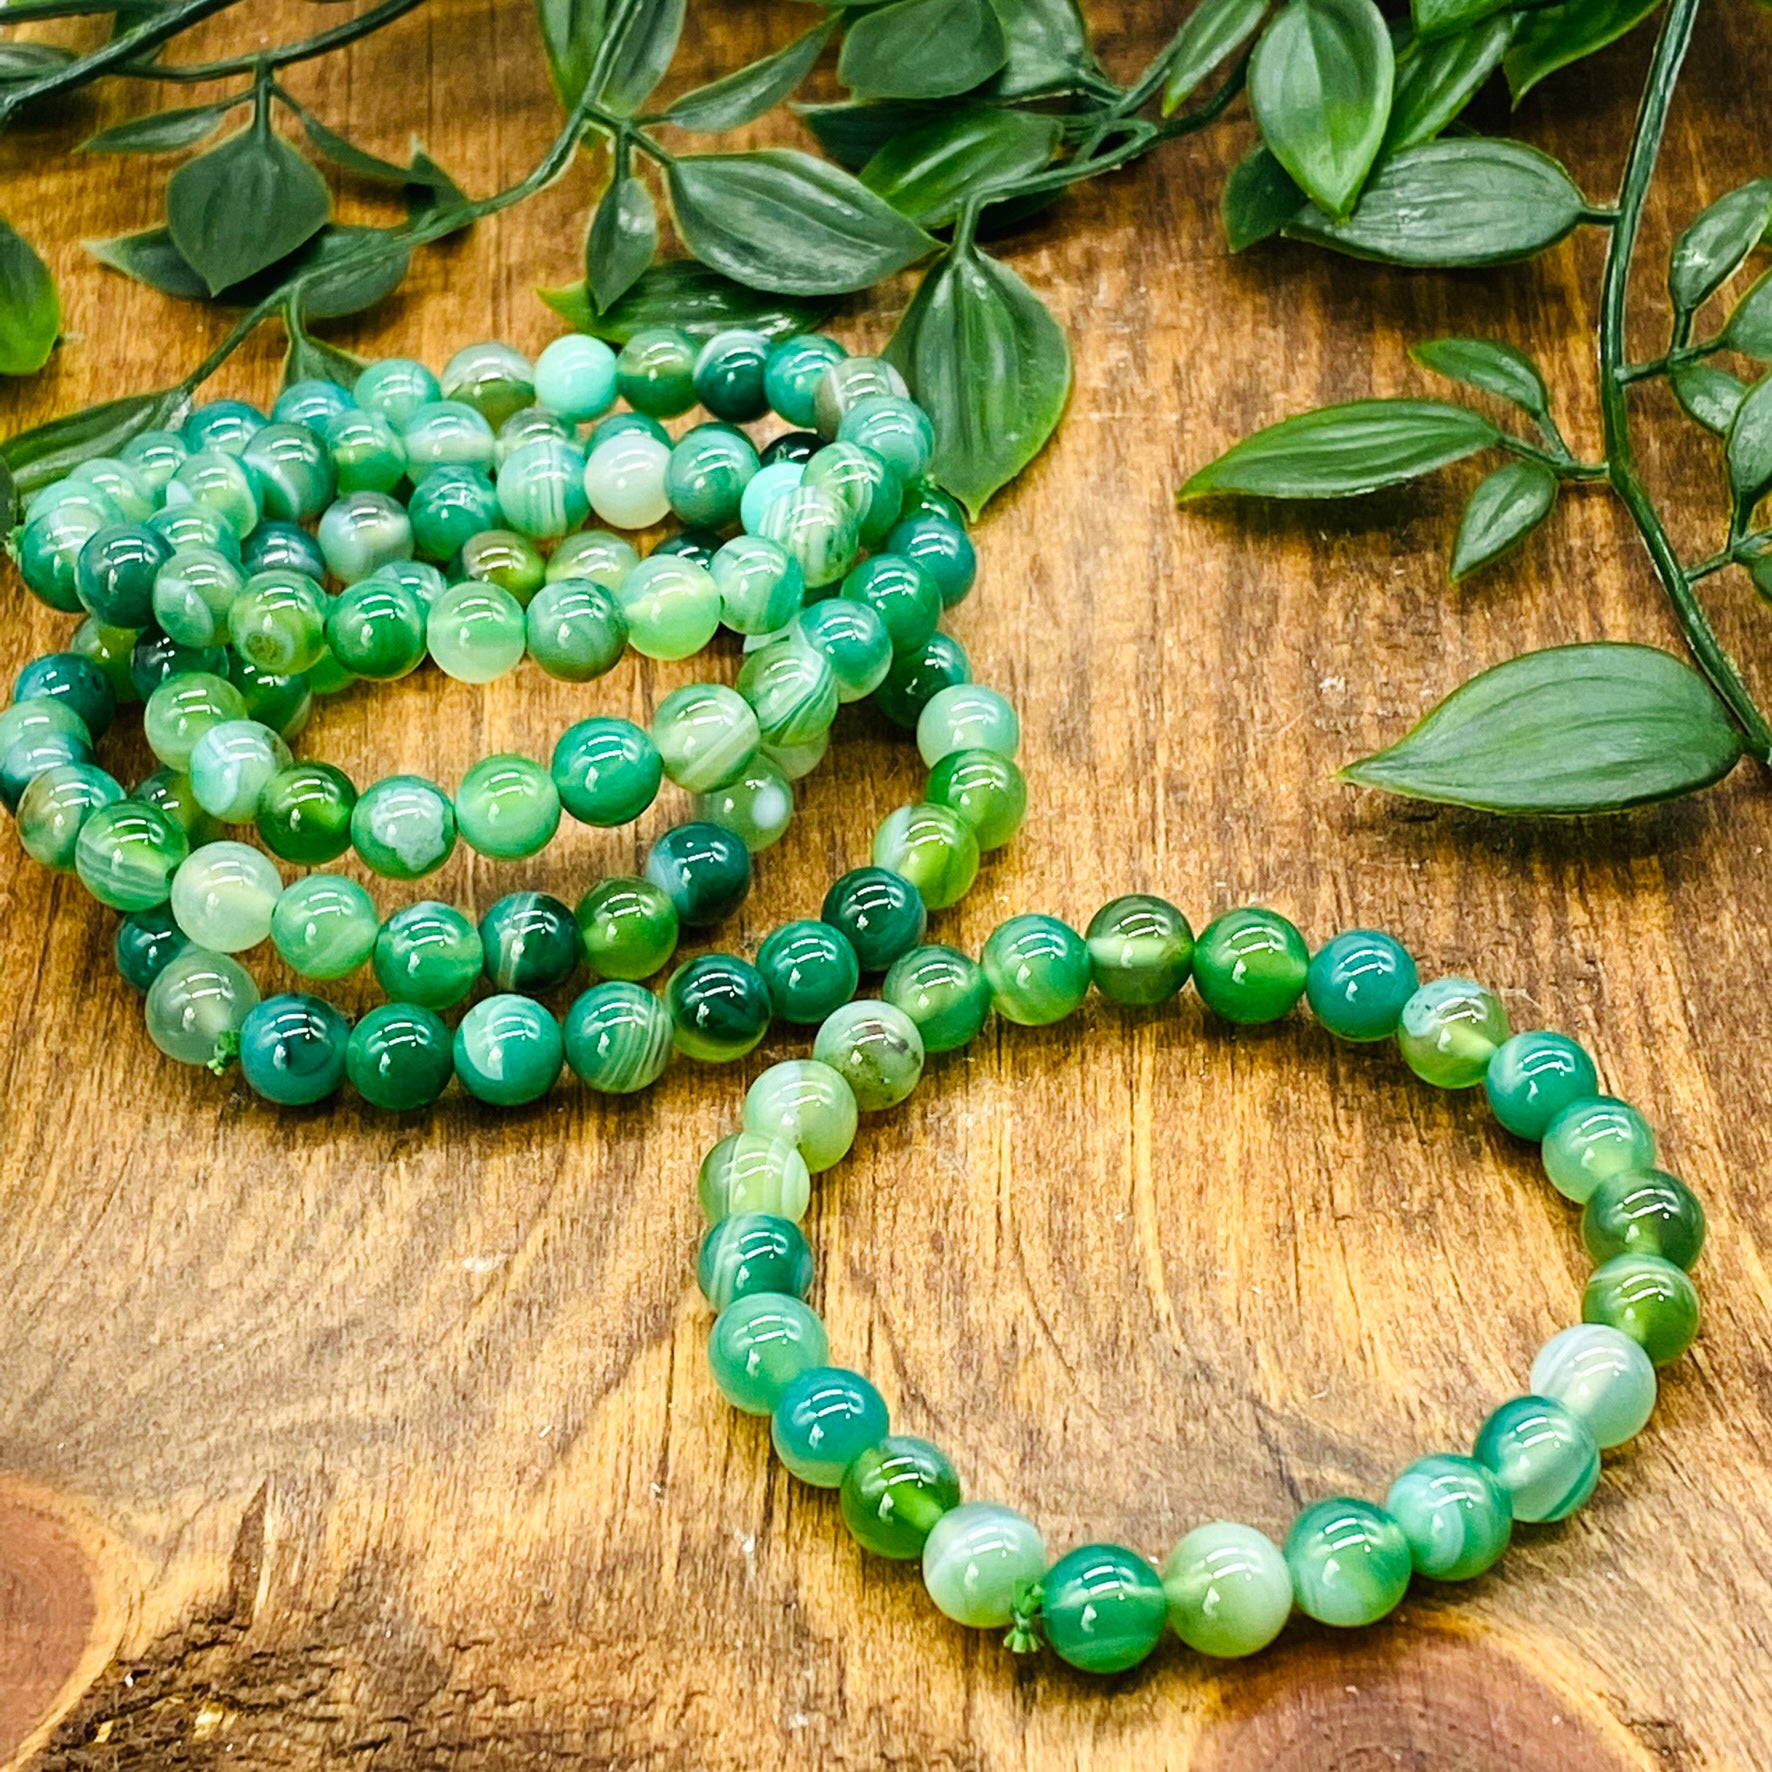 Buy Grade A Green Aventurine Crystal Bead Bracelet 8mm, Genuine Green  Aventurine Bracelet, Healing Crystals, Great Gift for Men & Women Online in  India - Etsy